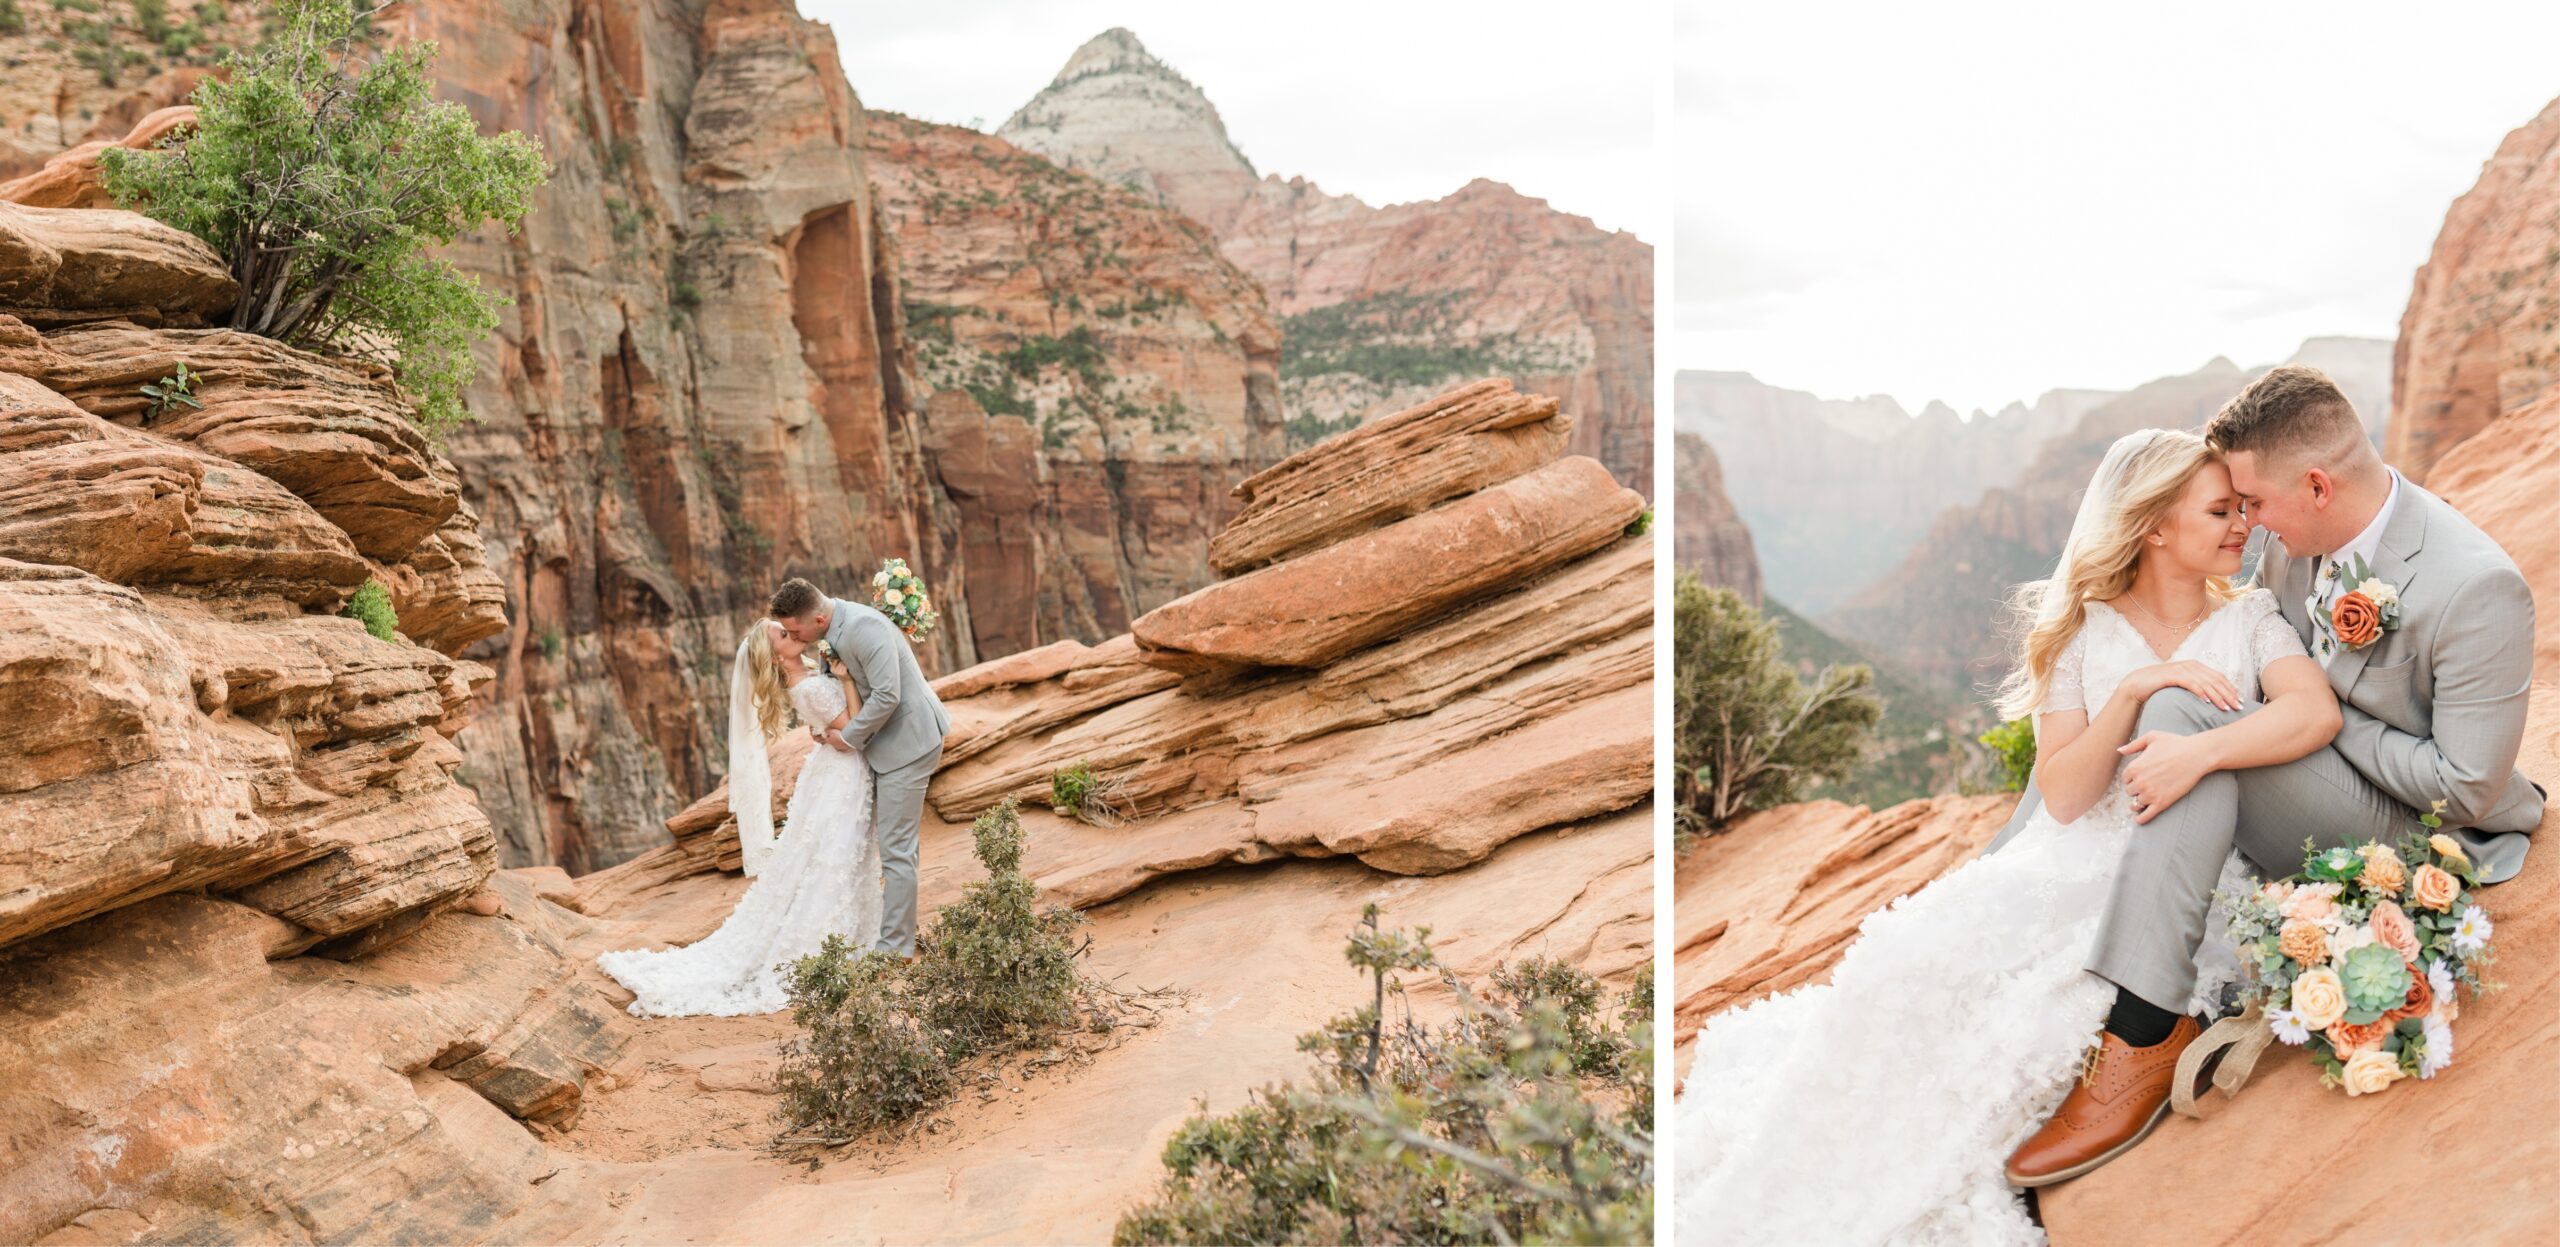 Bride and groom in zion national park